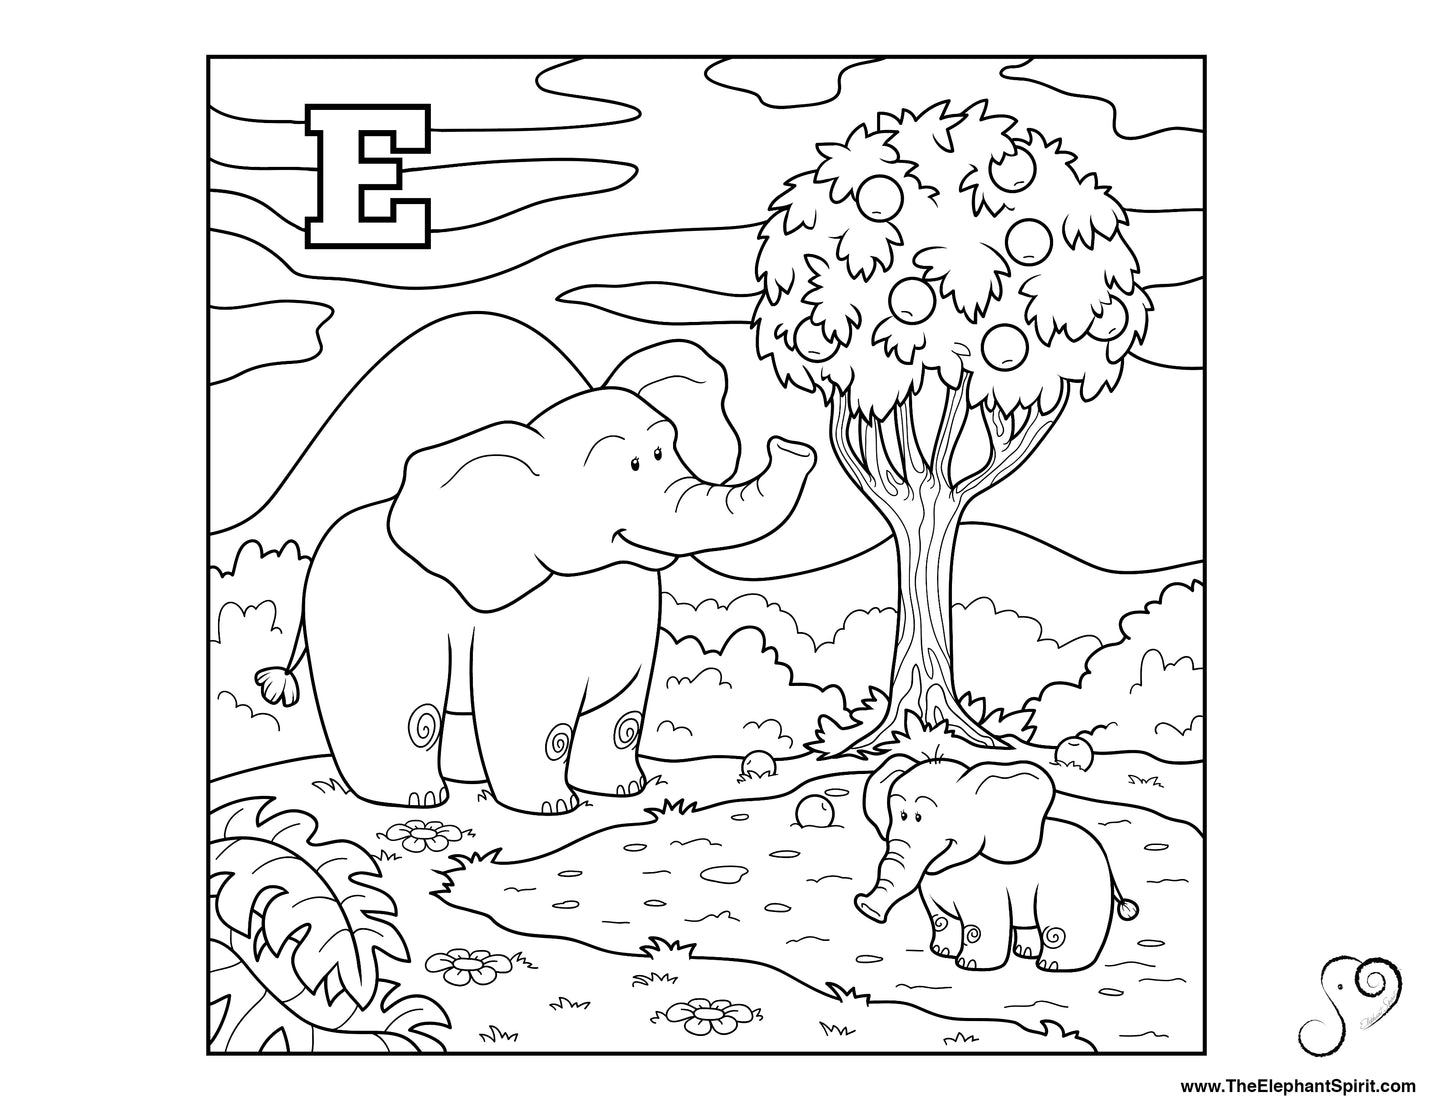 FREE Coloring Page 10-13